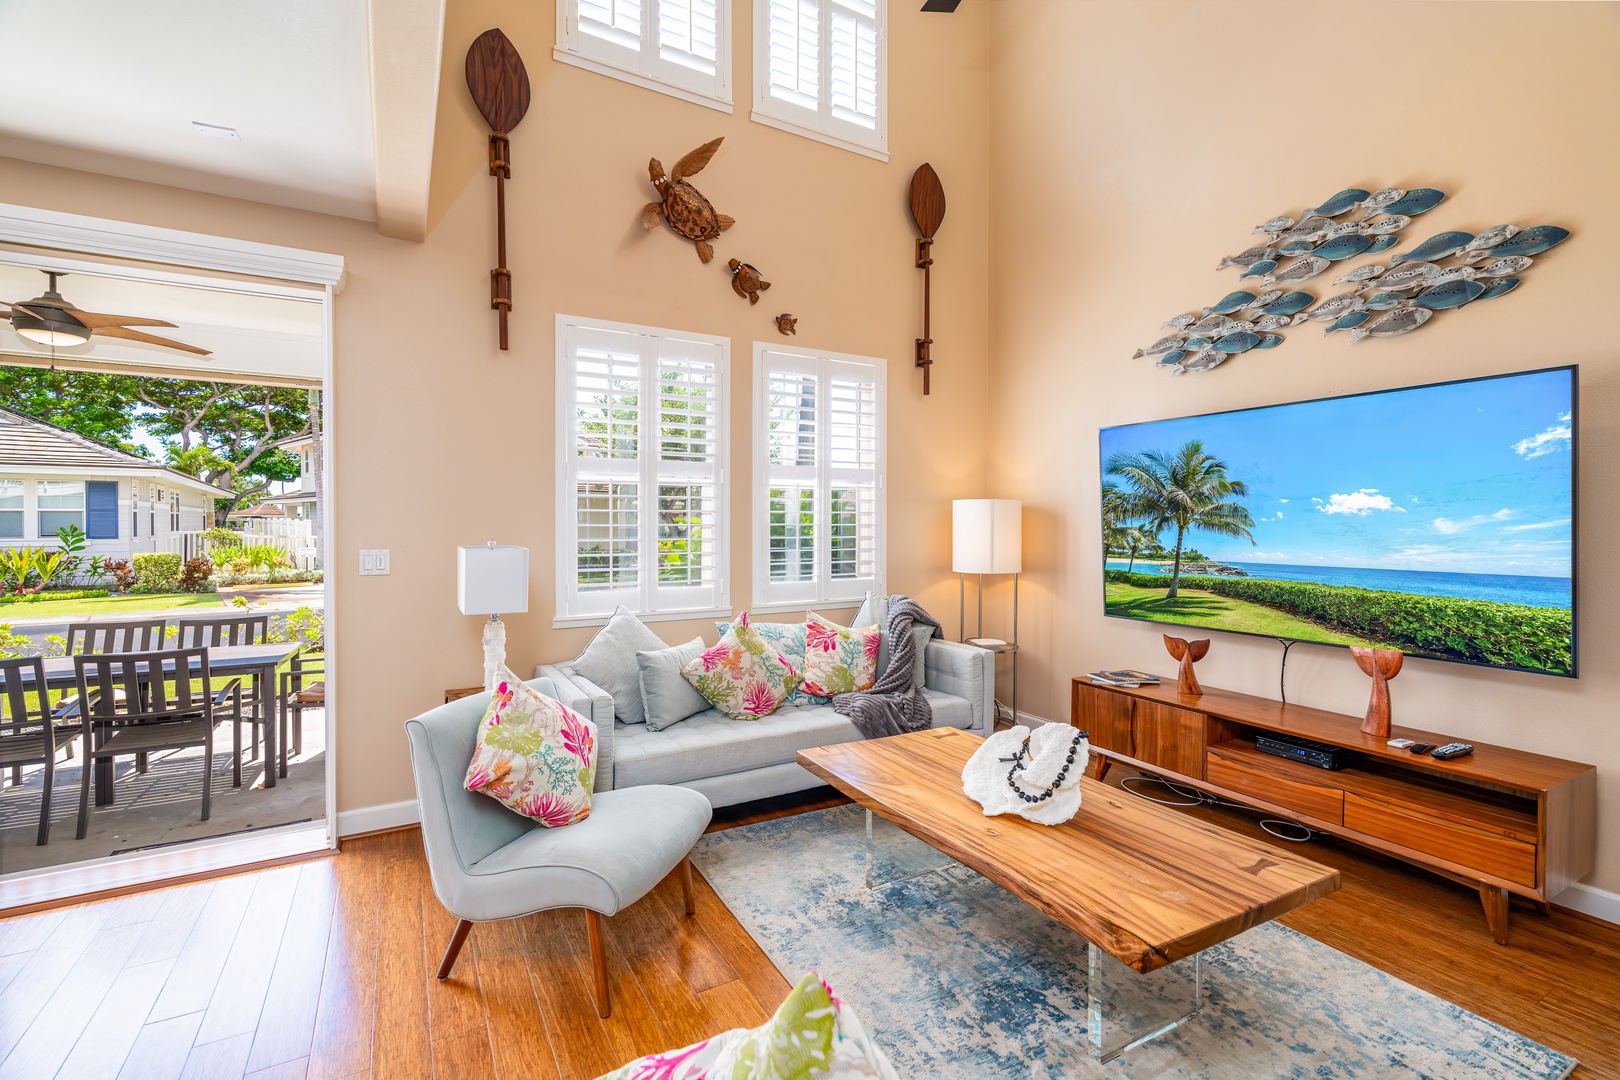 Kapolei Vacation Rentals, Ko Olina Kai 1081C - This home features high ceilings and bright colorful design.